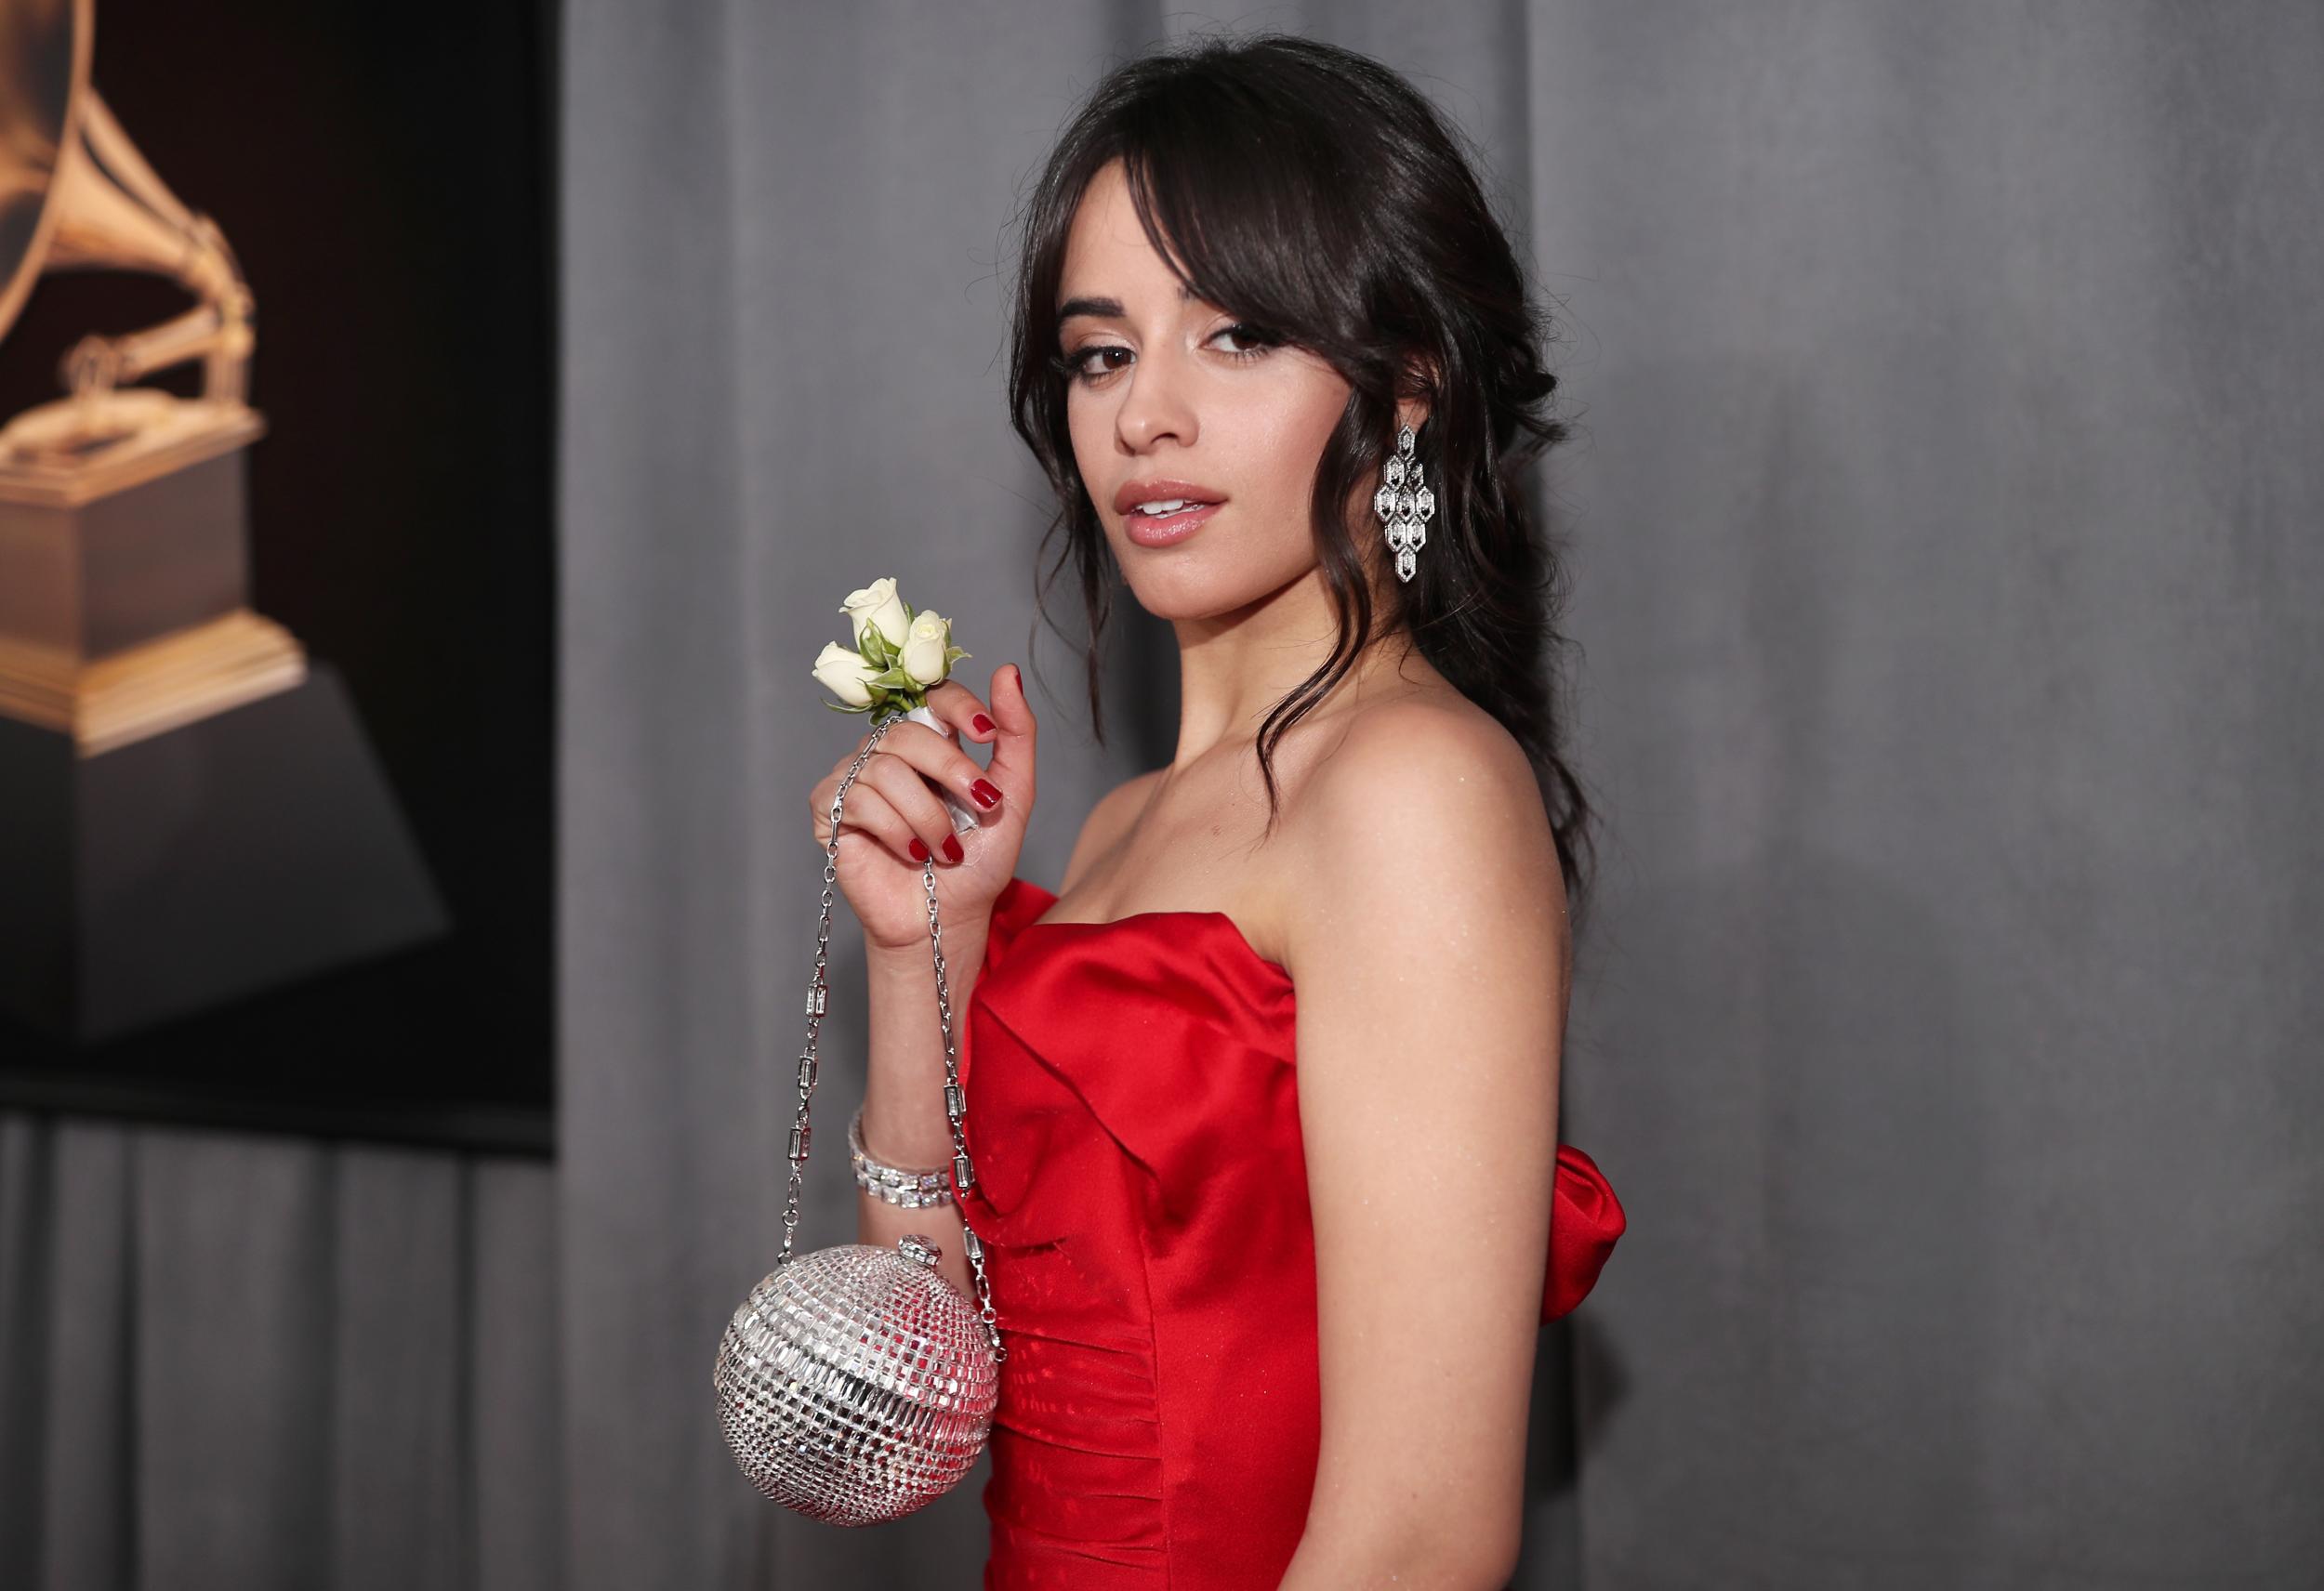 Camila Cabello attends the 60th Annual GRAMMY Awards at Madison Square Garden on January 28, 2018 in New York City.